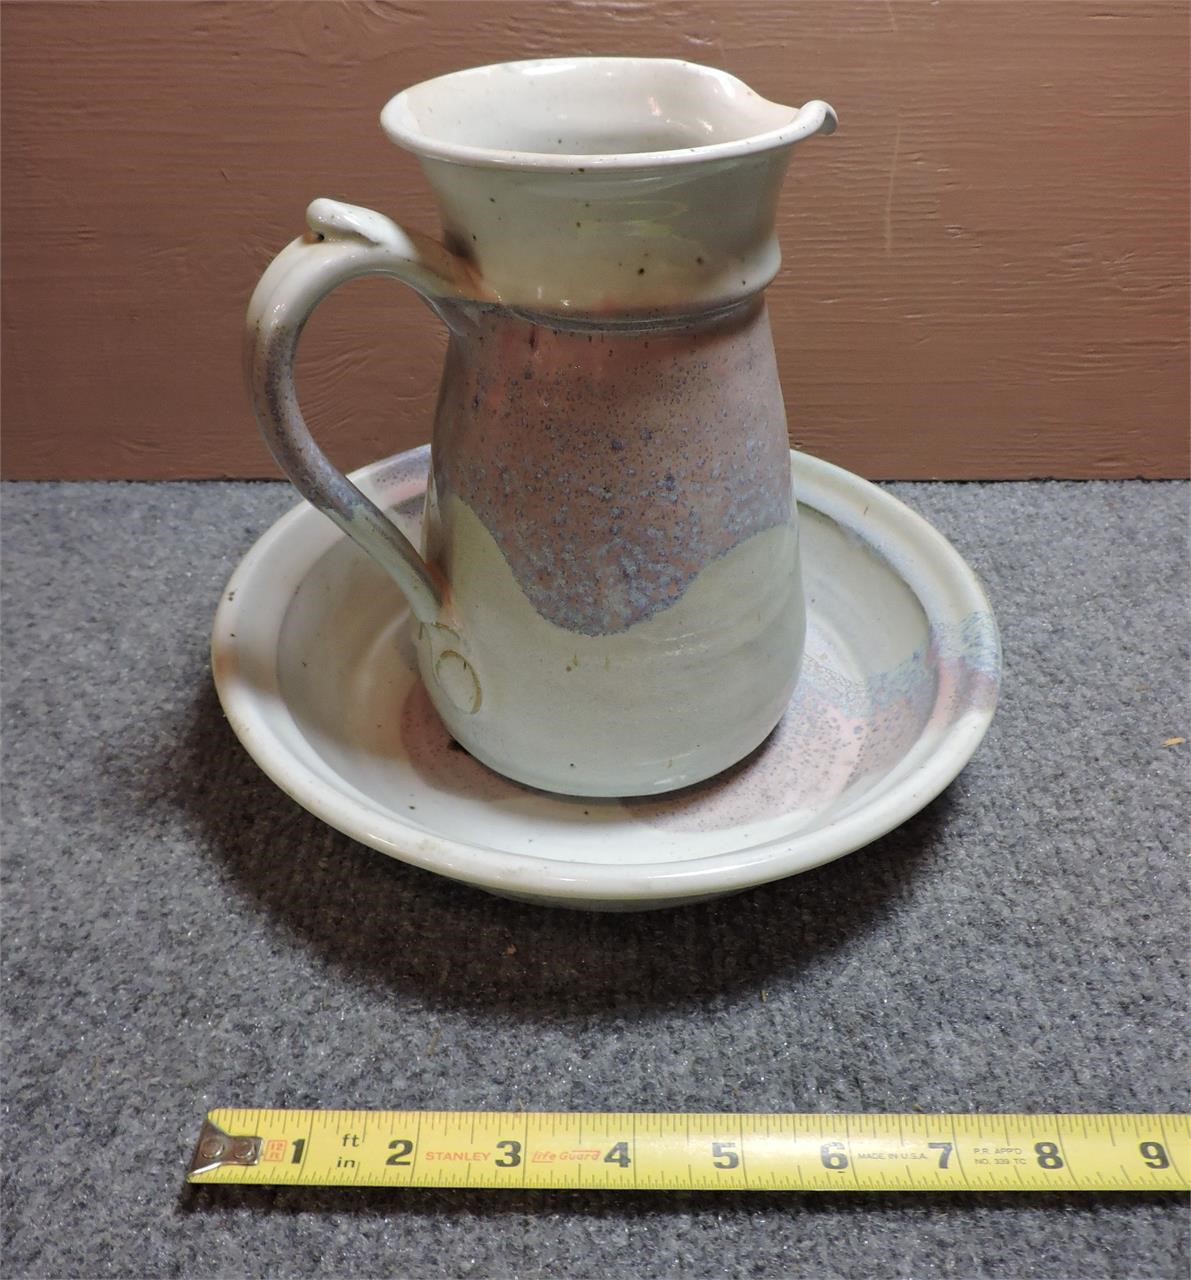 Clay Pottery, Wash Basin And Pitcher